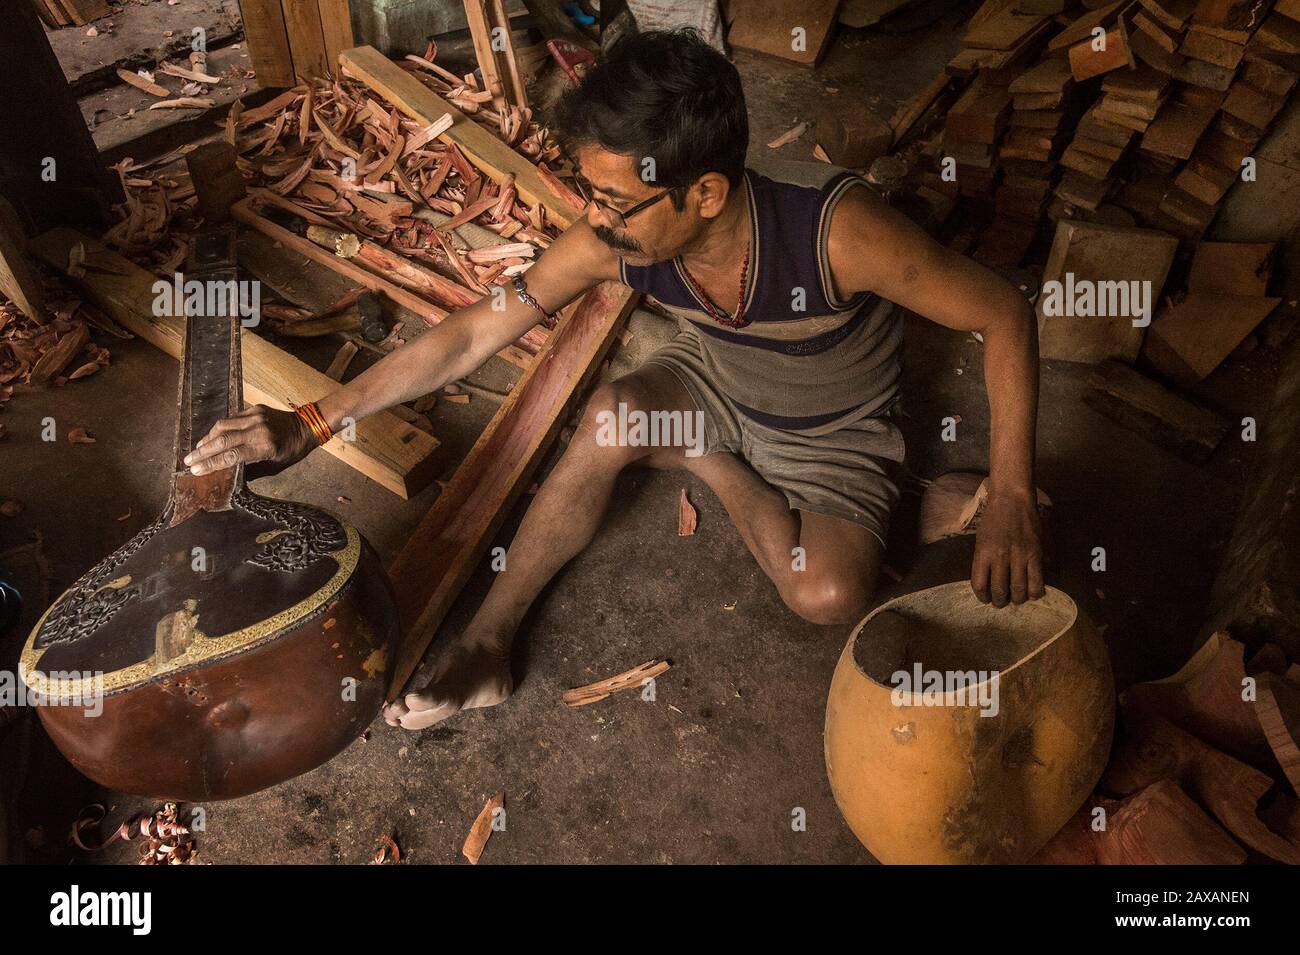 Kolkata, India. 11th Feb, 2020. An artisan makes string instruments for Indian classical music on the outskirts of Kolkata, India, on Feb. 11, 2020. Many string instruments in Indian classical music feature portions of natural material which give a special sound to the instruments. Credit: Tumpa Mondal/Xinhua/Alamy Live News Stock Photo